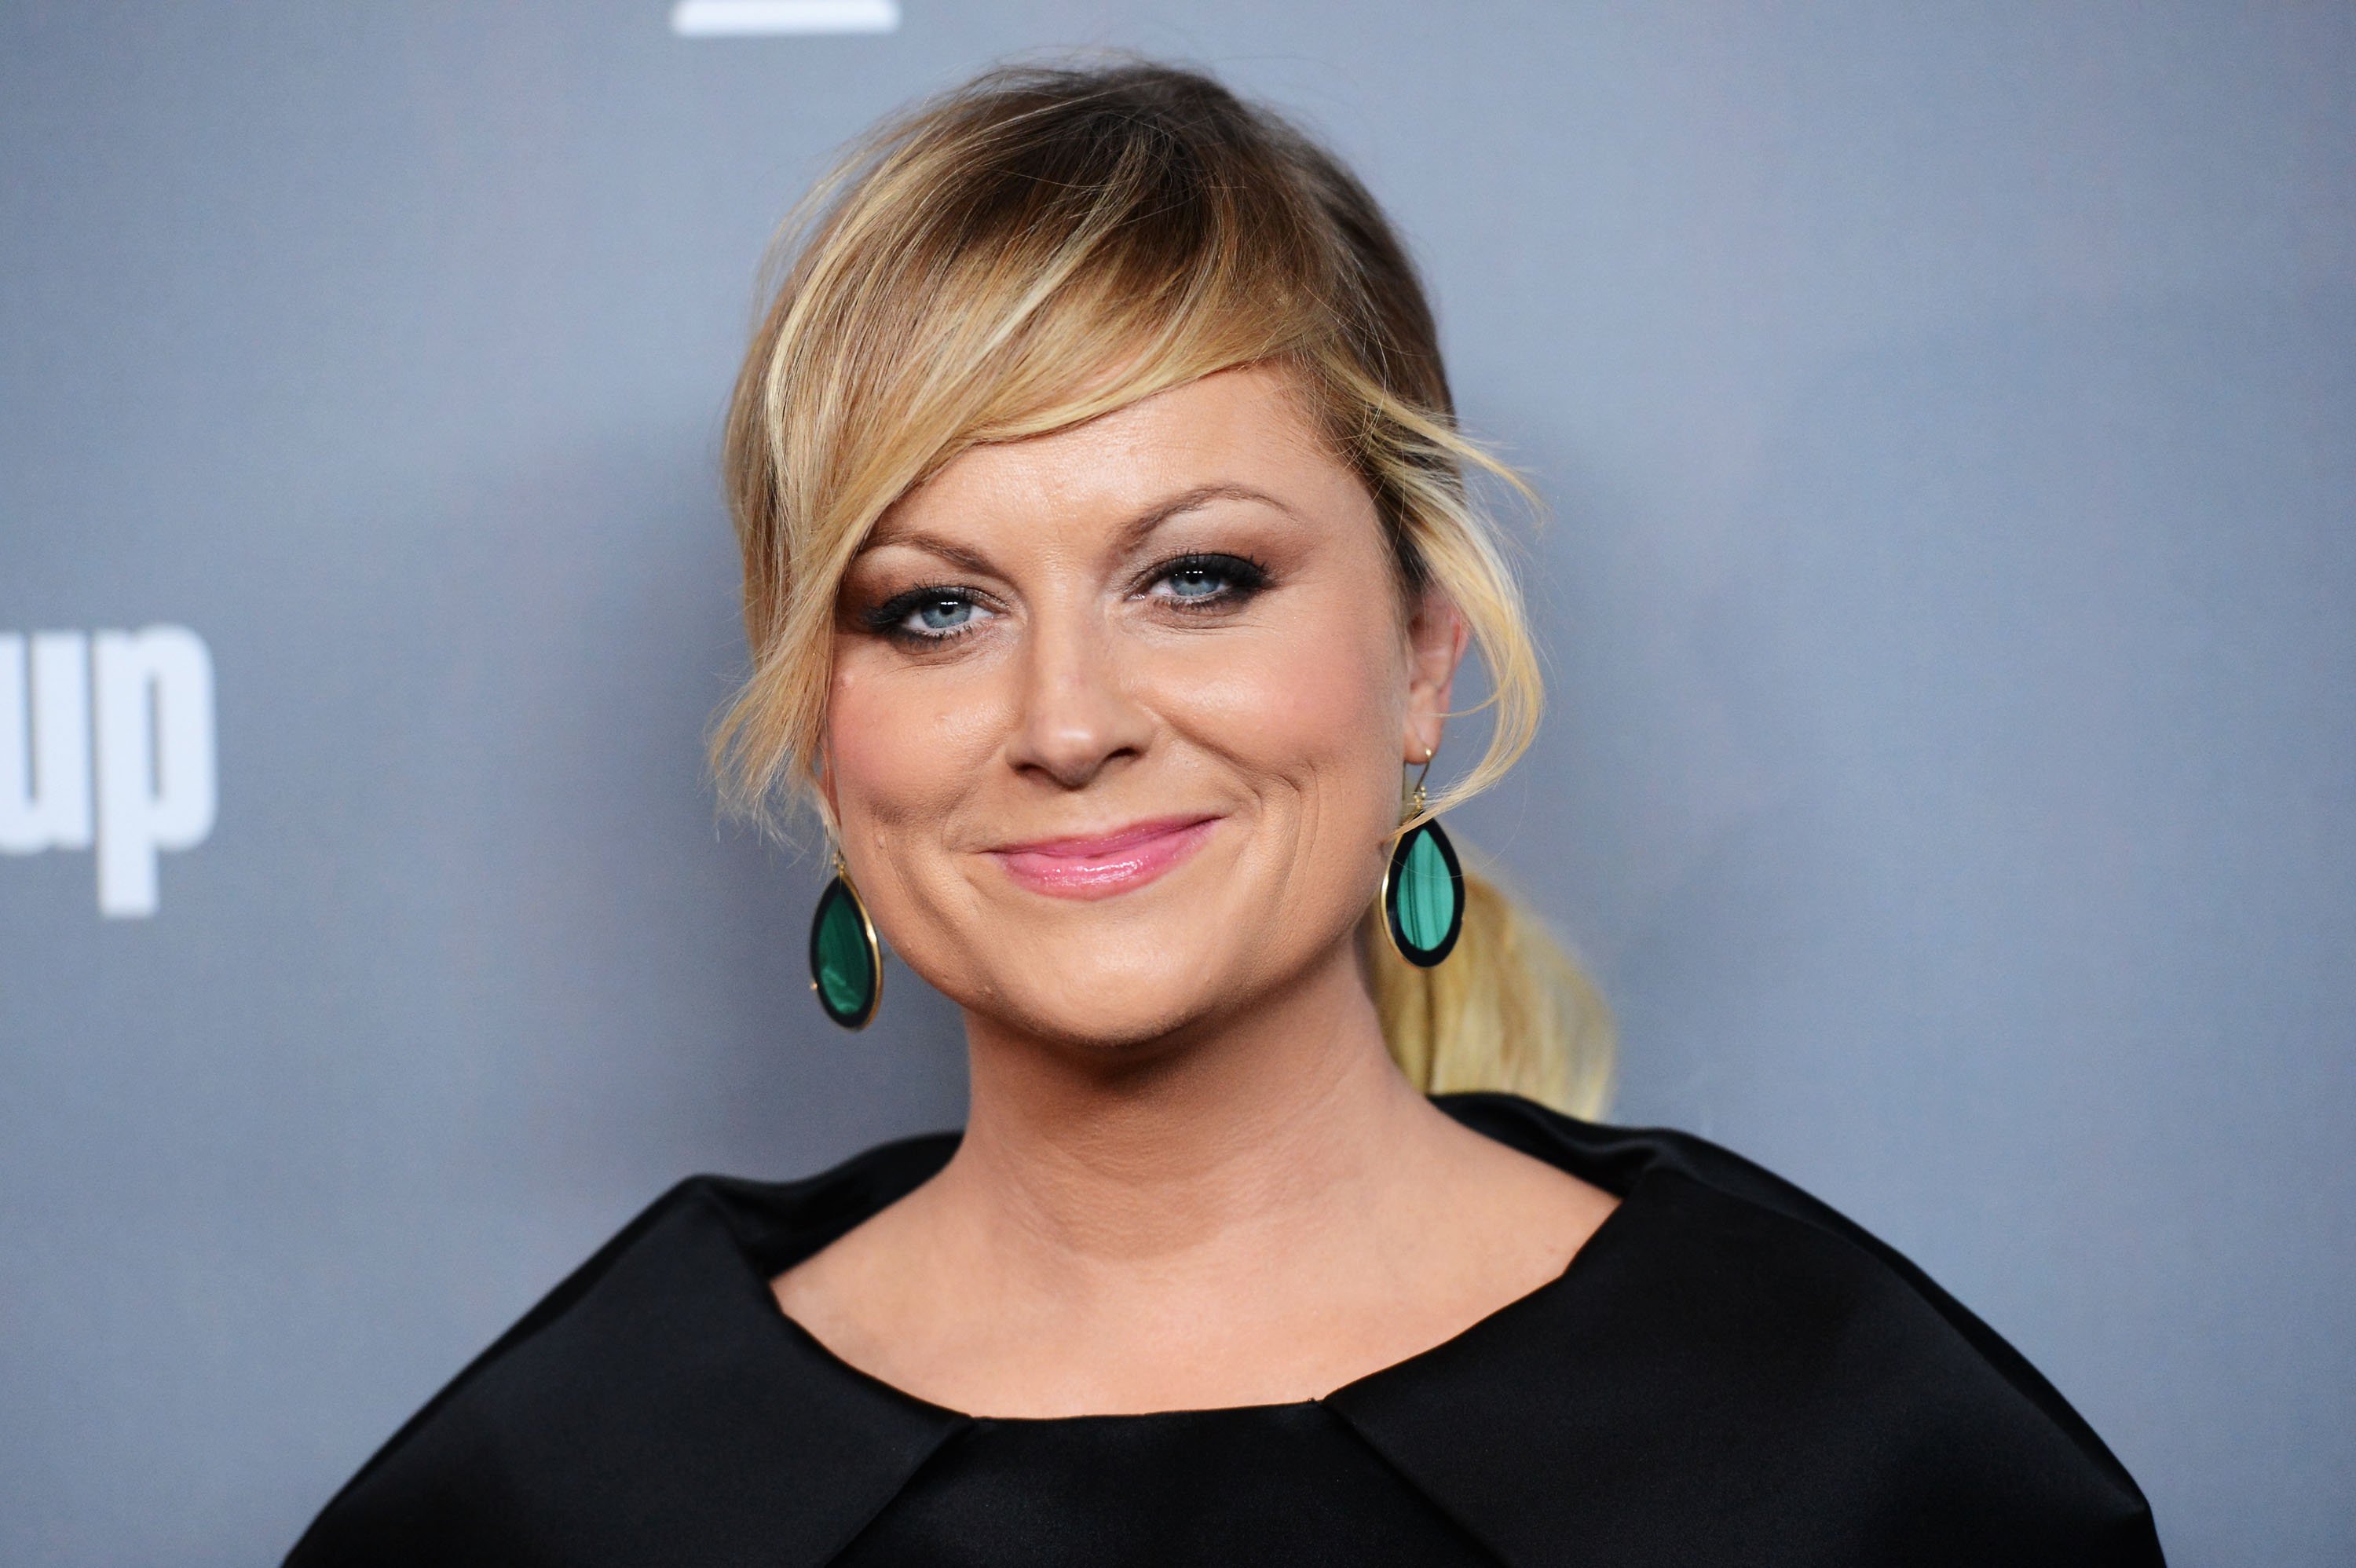 Actress Amy Poehler attends the 15th Annual Costume Designers Guild Awards with presenting sponsor Lacoste at The Beverly Hilton Hotel on February 19, 2013 in Beverly Hills, California. |Photo: Getty Images